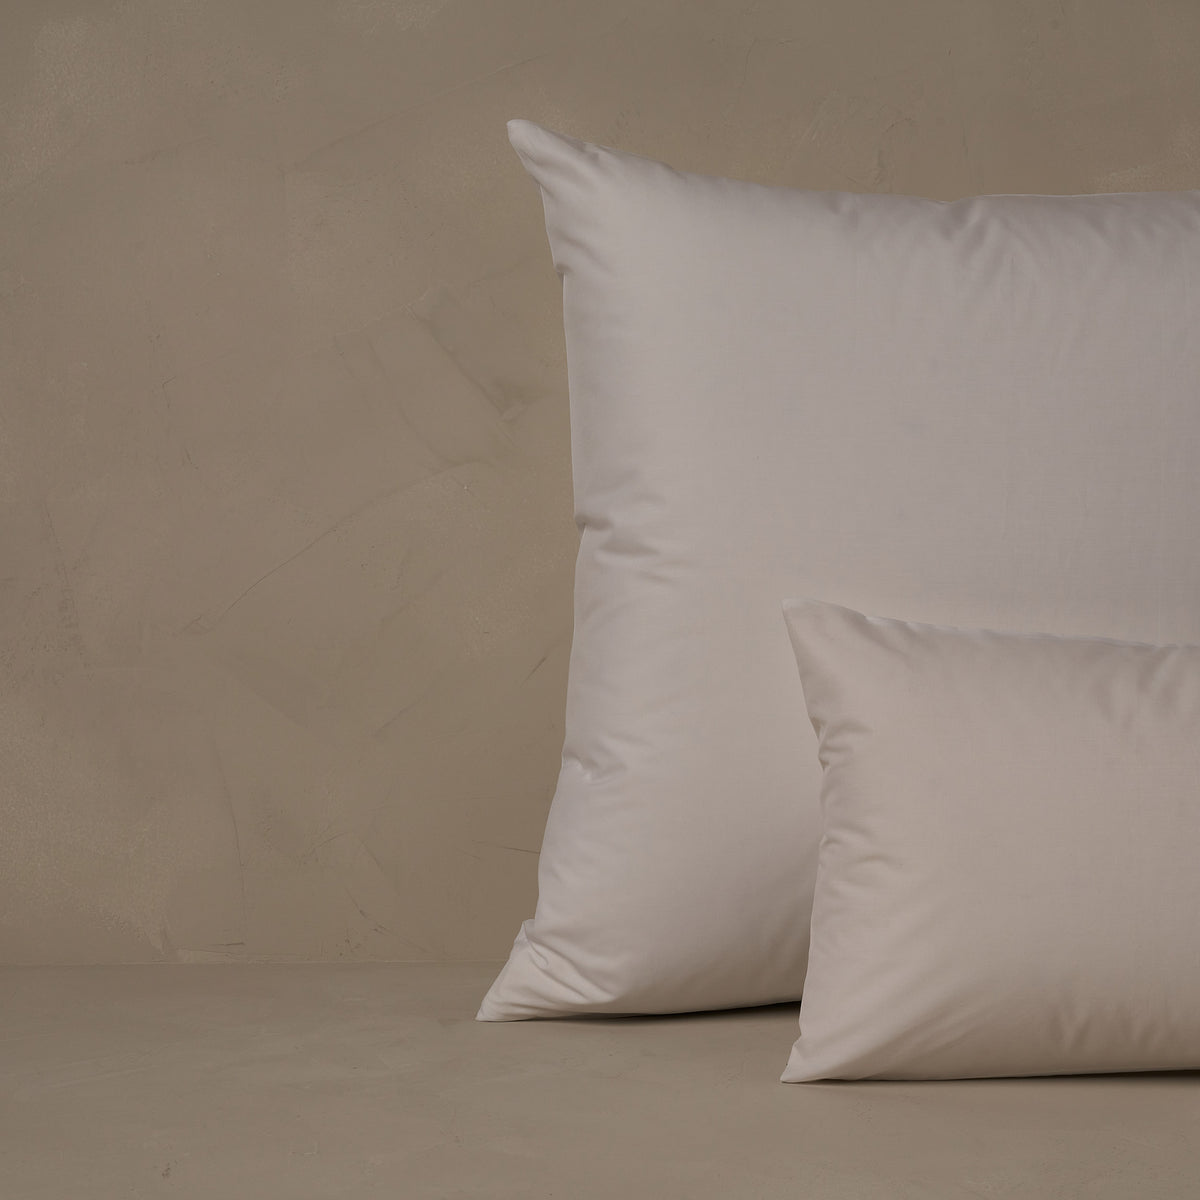 An image of a small boudoir or travel size pillow stacked in front of a large euro size pillow. The pillow cases are made in Italy of LETTO Americano Cotton Percale in color white, a crisp and cool American grown Supima cotton. data-image-id=